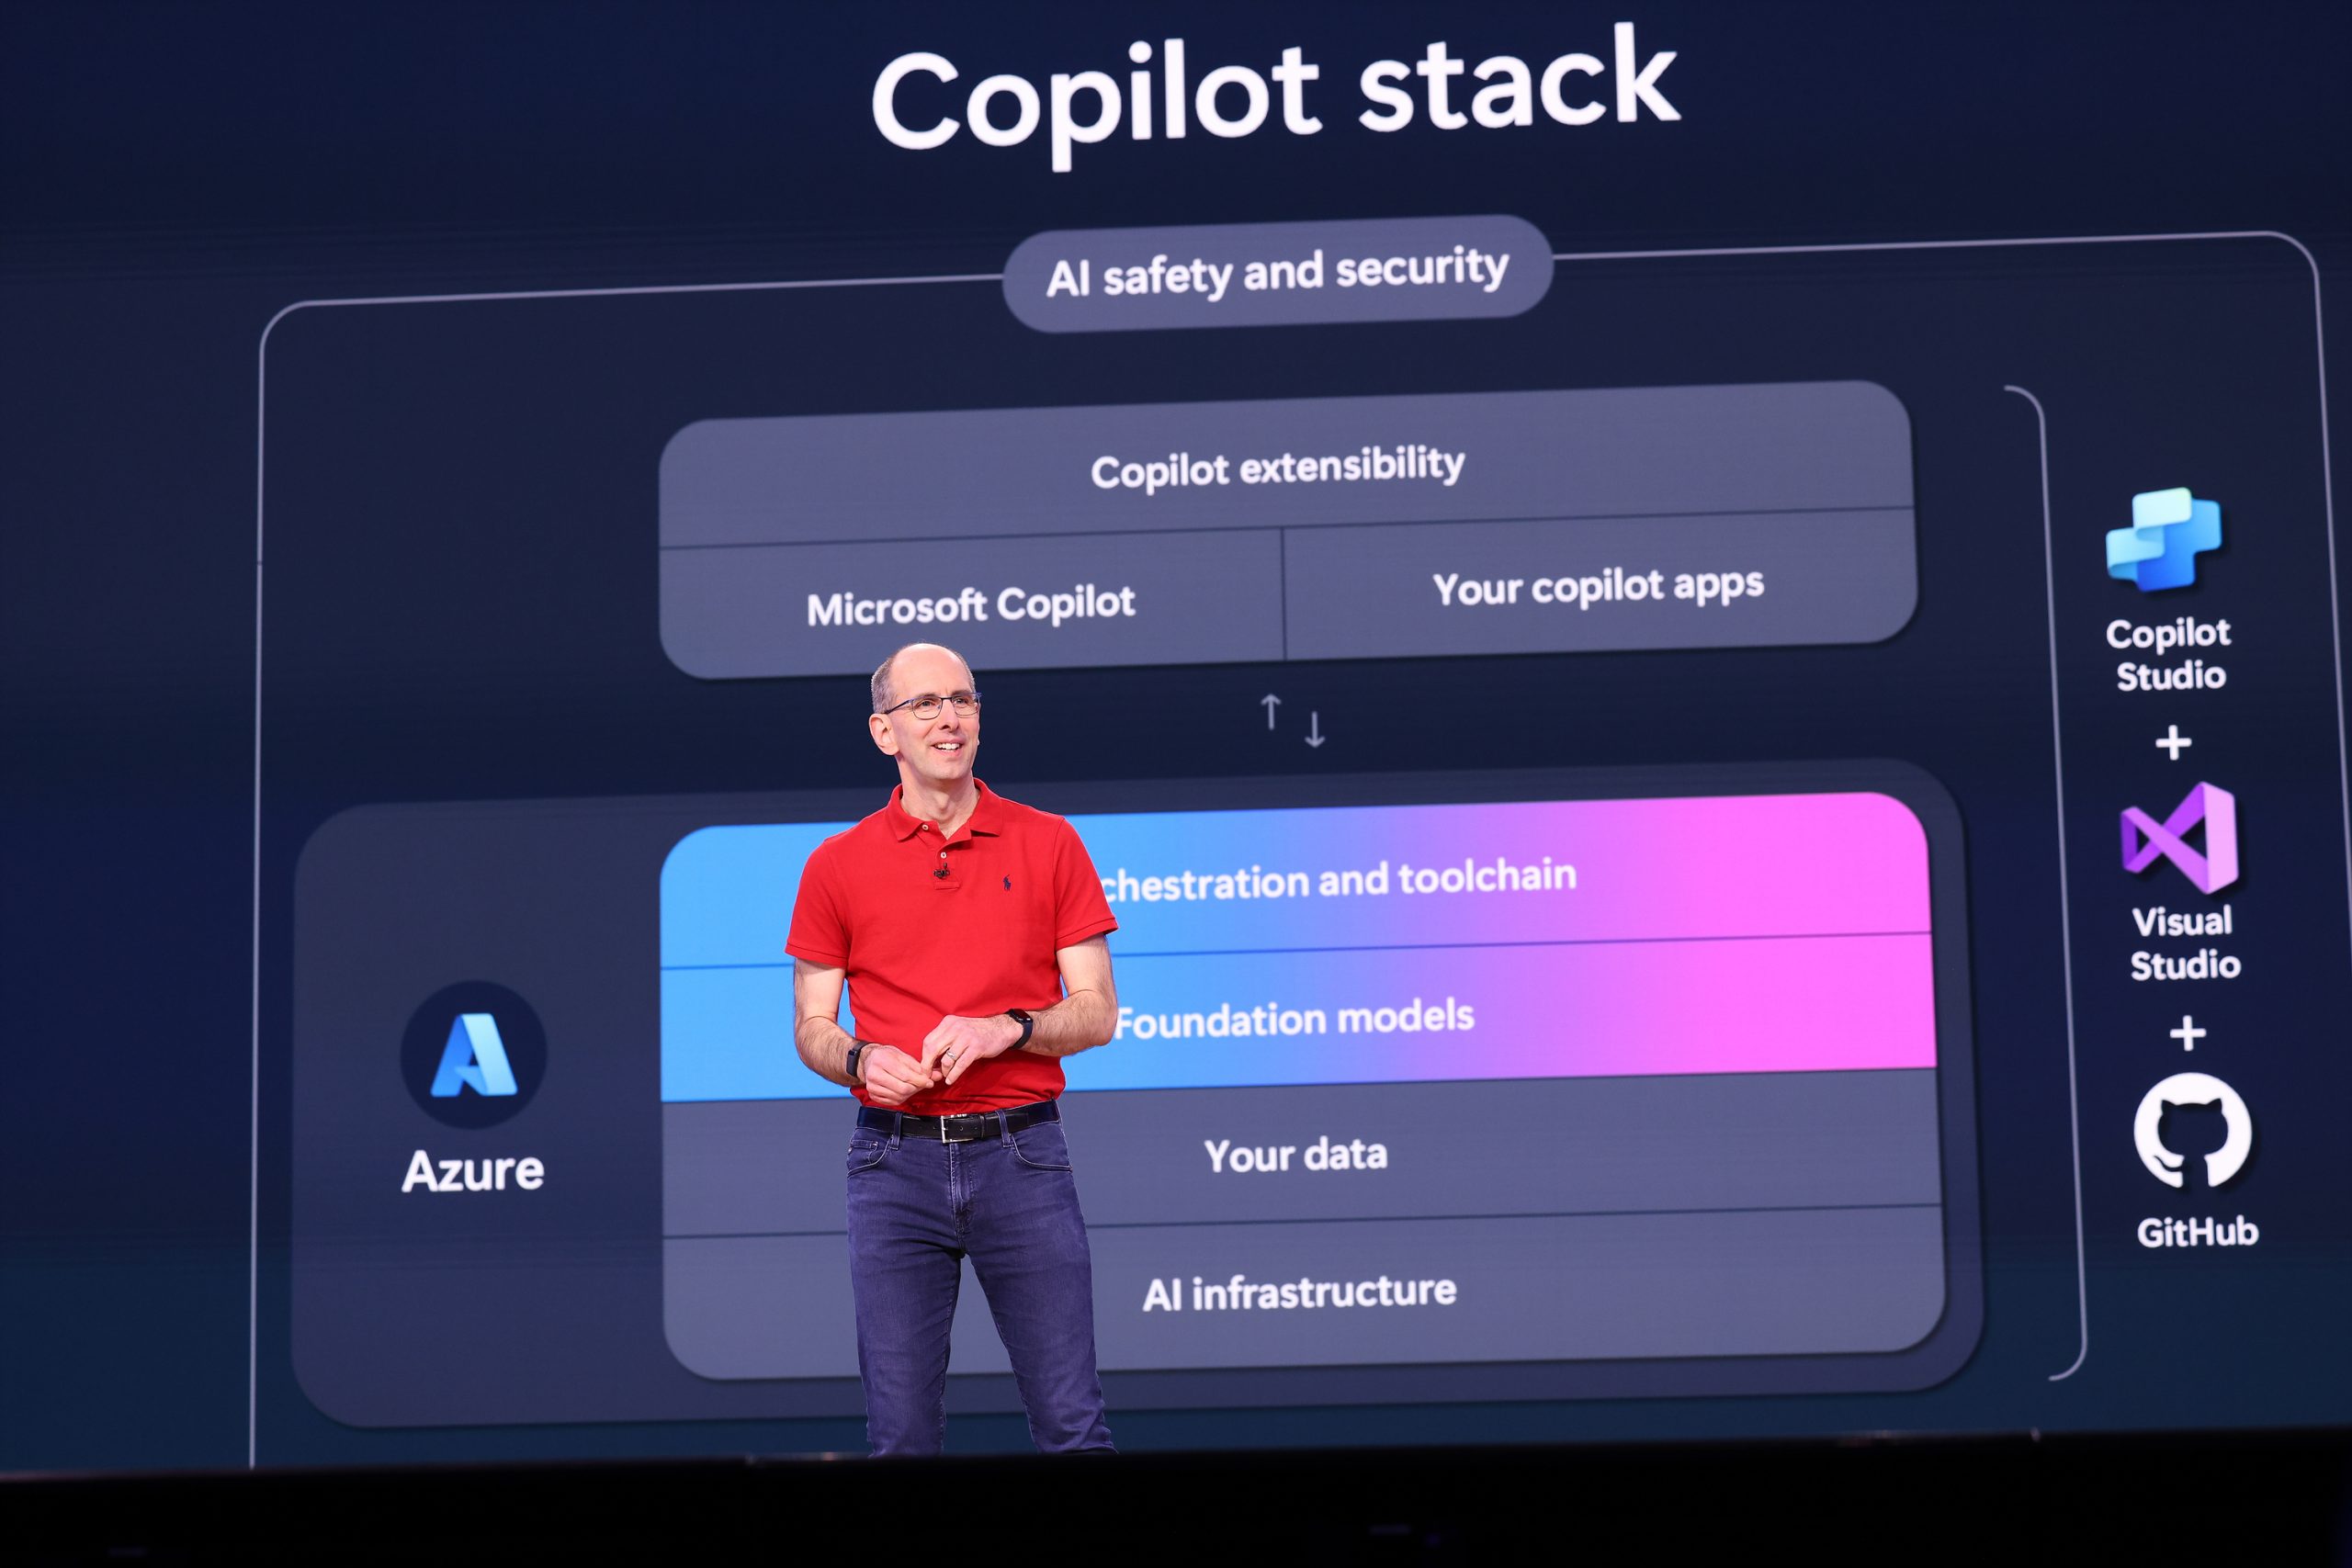 A man standing on stage speaking to an audience with text about Copilot stack on the screen behind him